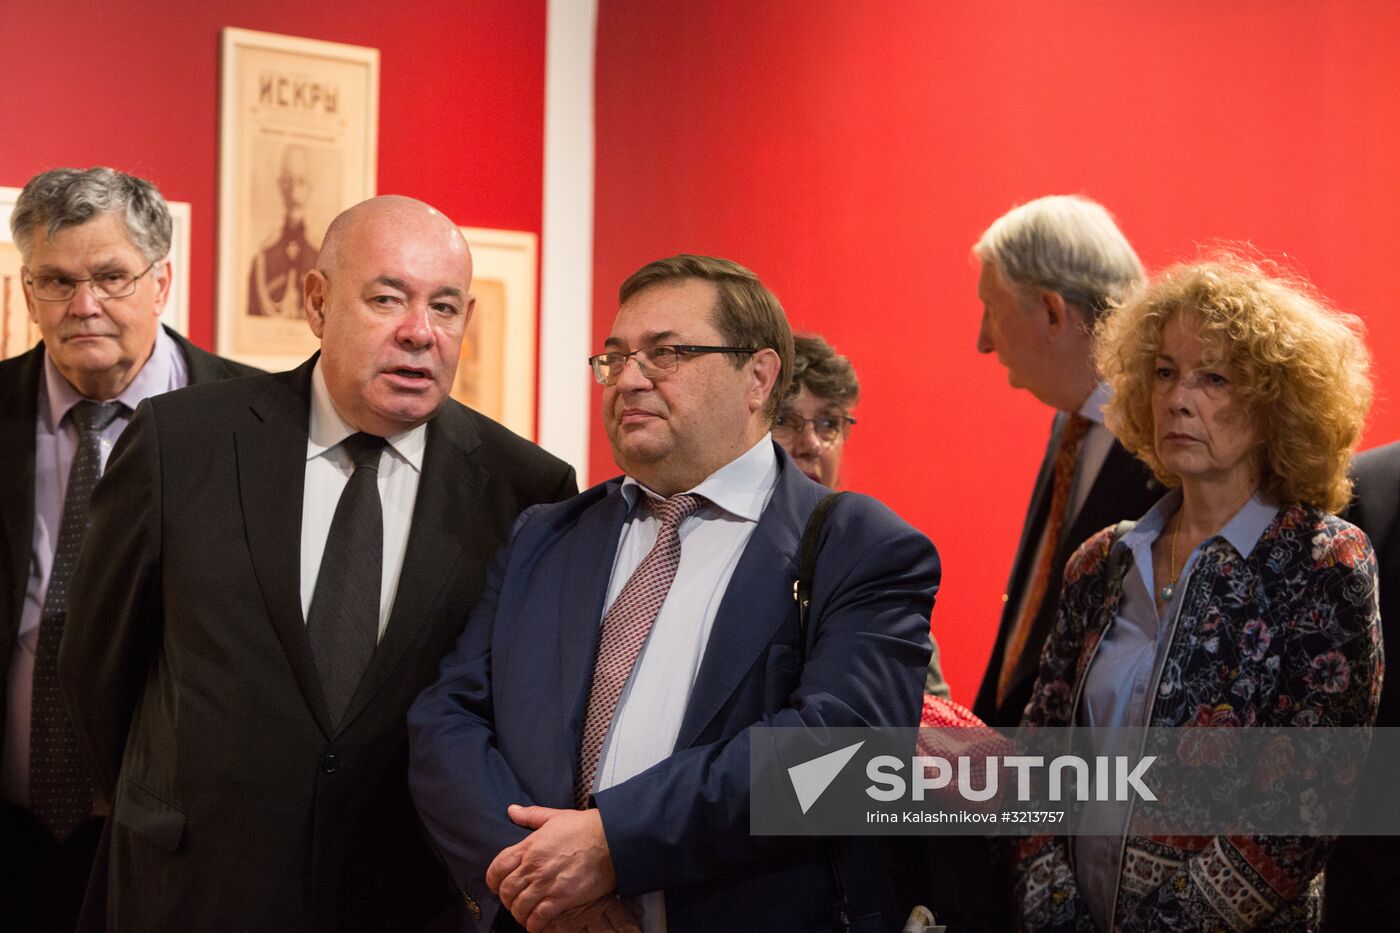 Opening of "1917: History in Full" exhibition in Paris